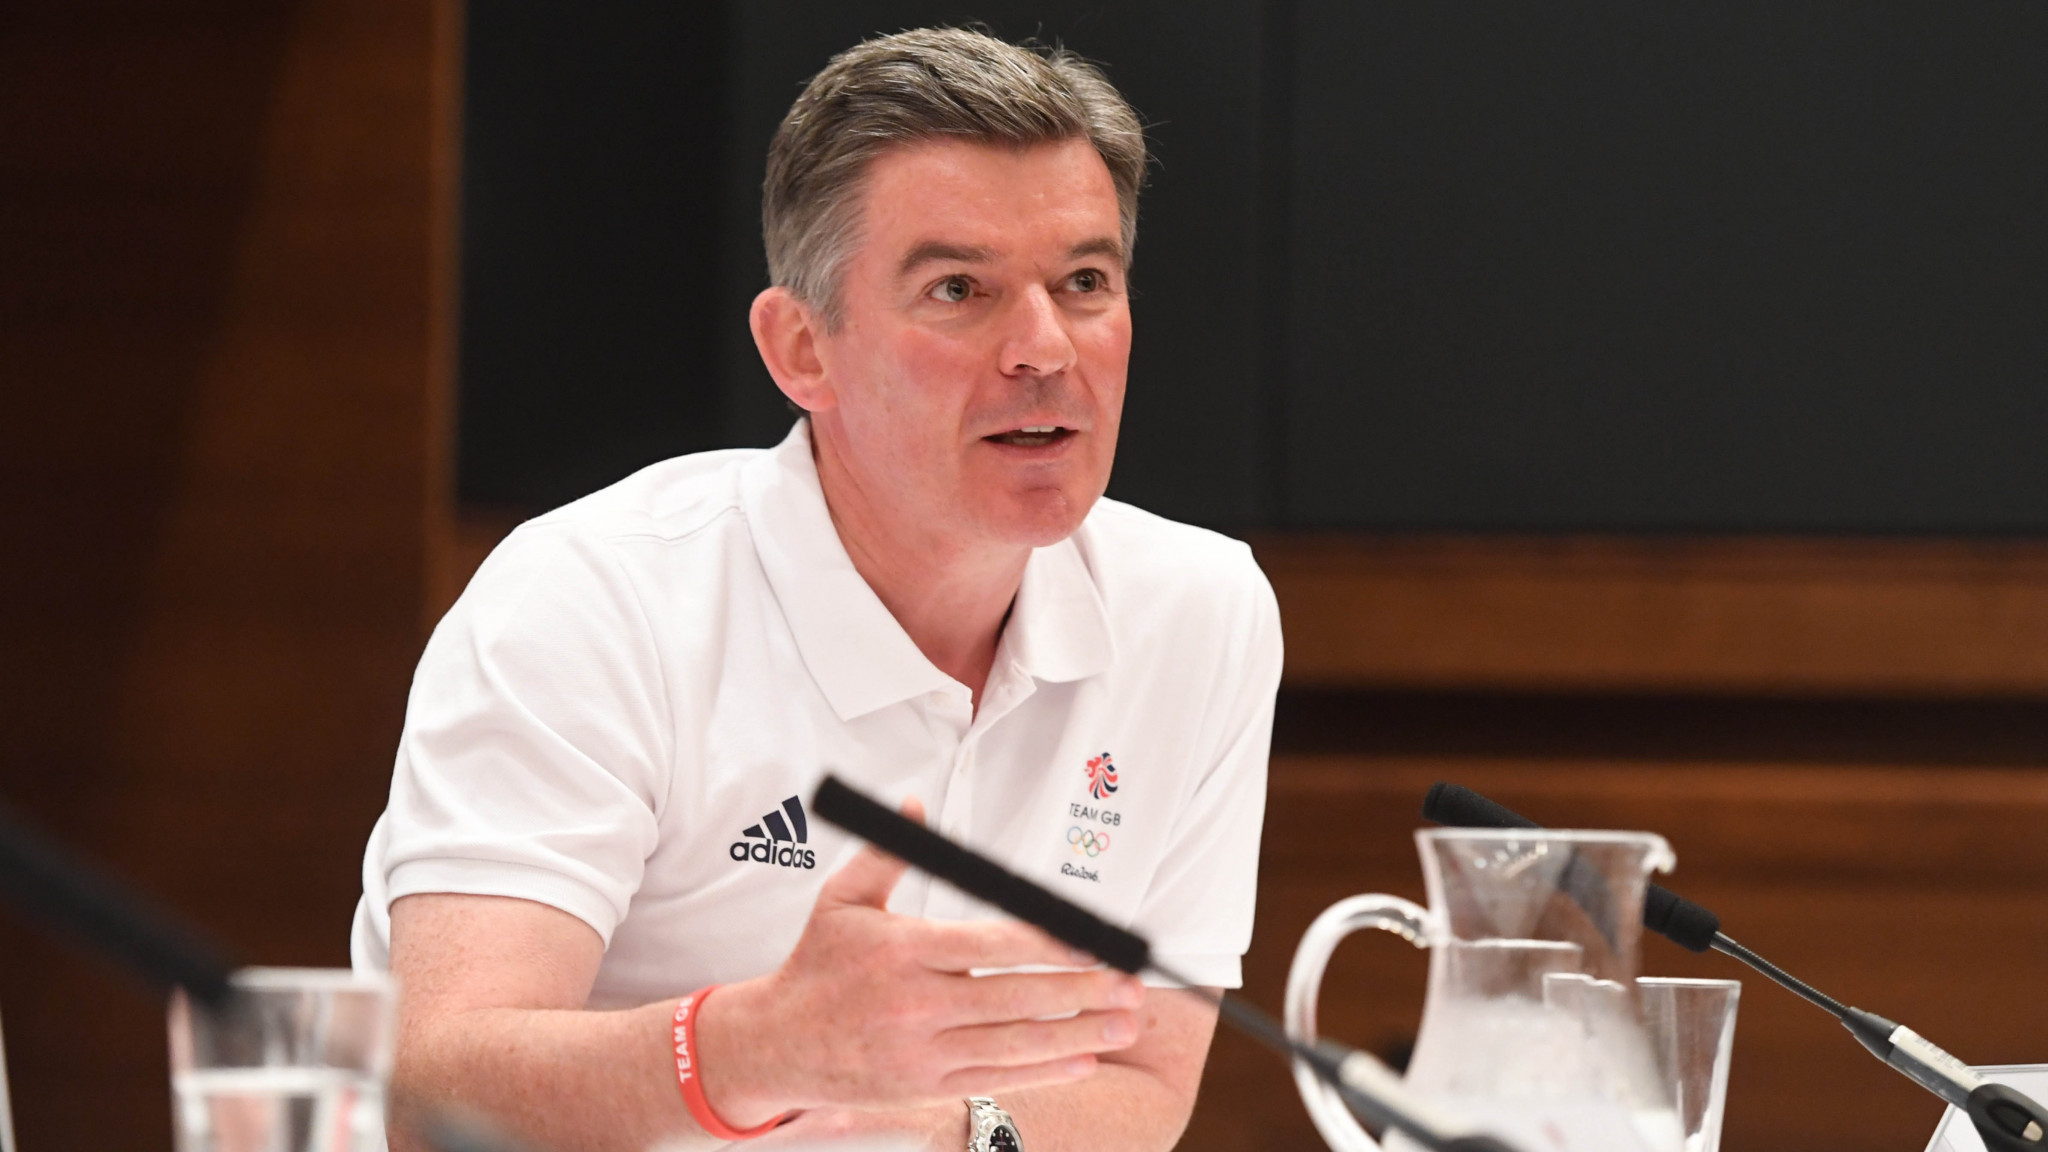 British Olympic Association chair Sir Hugh Robertson is among the trustees to inherit the 